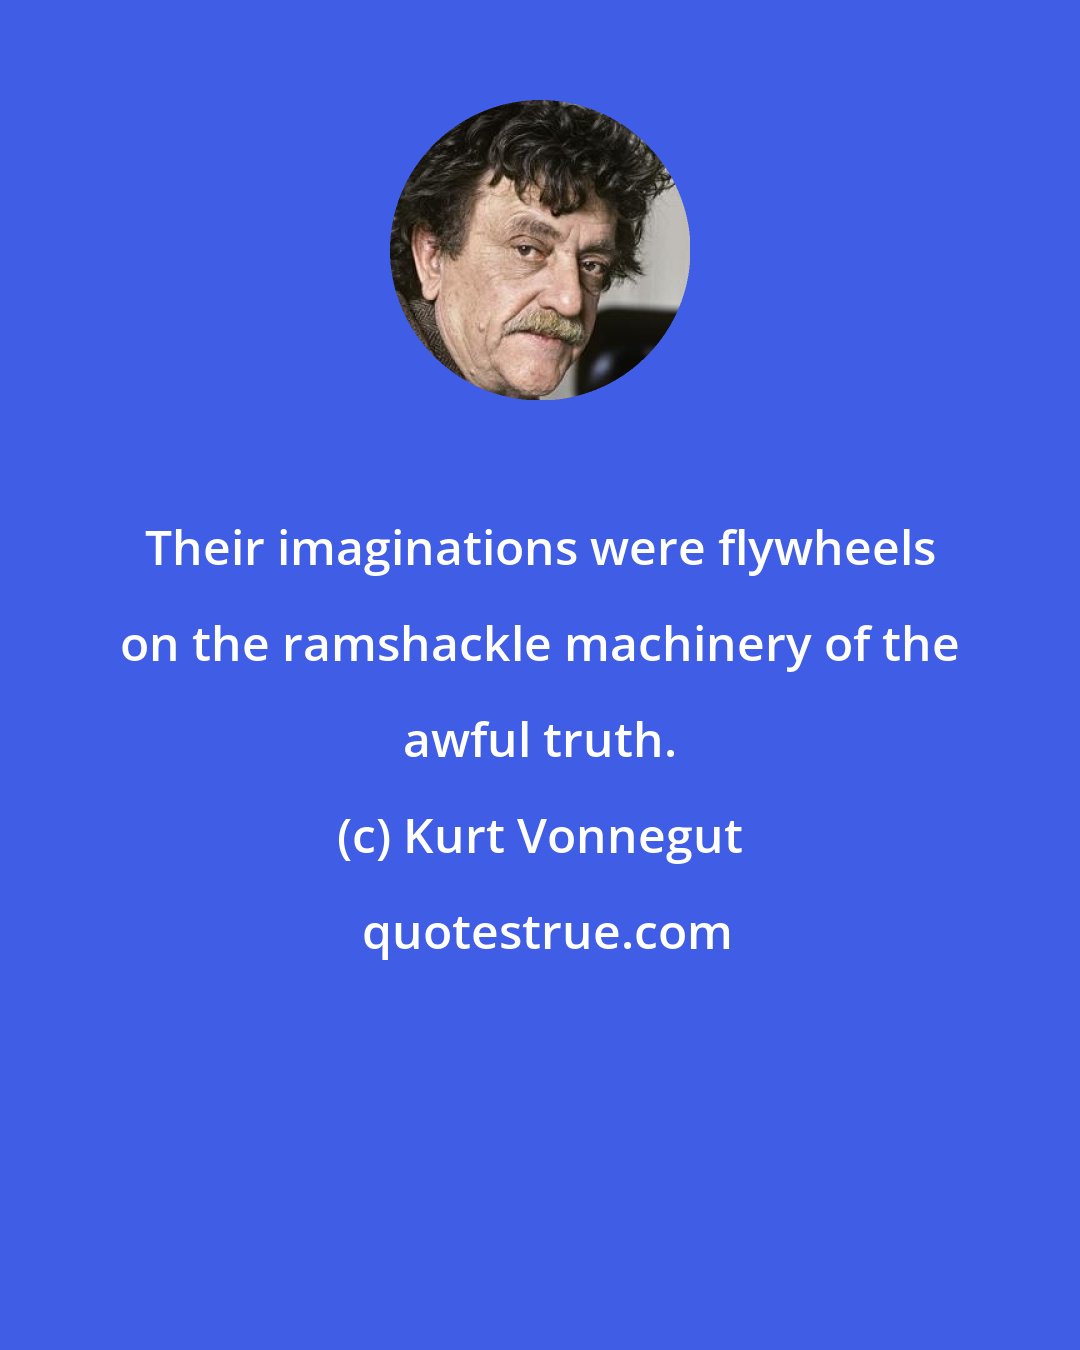 Kurt Vonnegut: Their imaginations were flywheels on the ramshackle machinery of the awful truth.